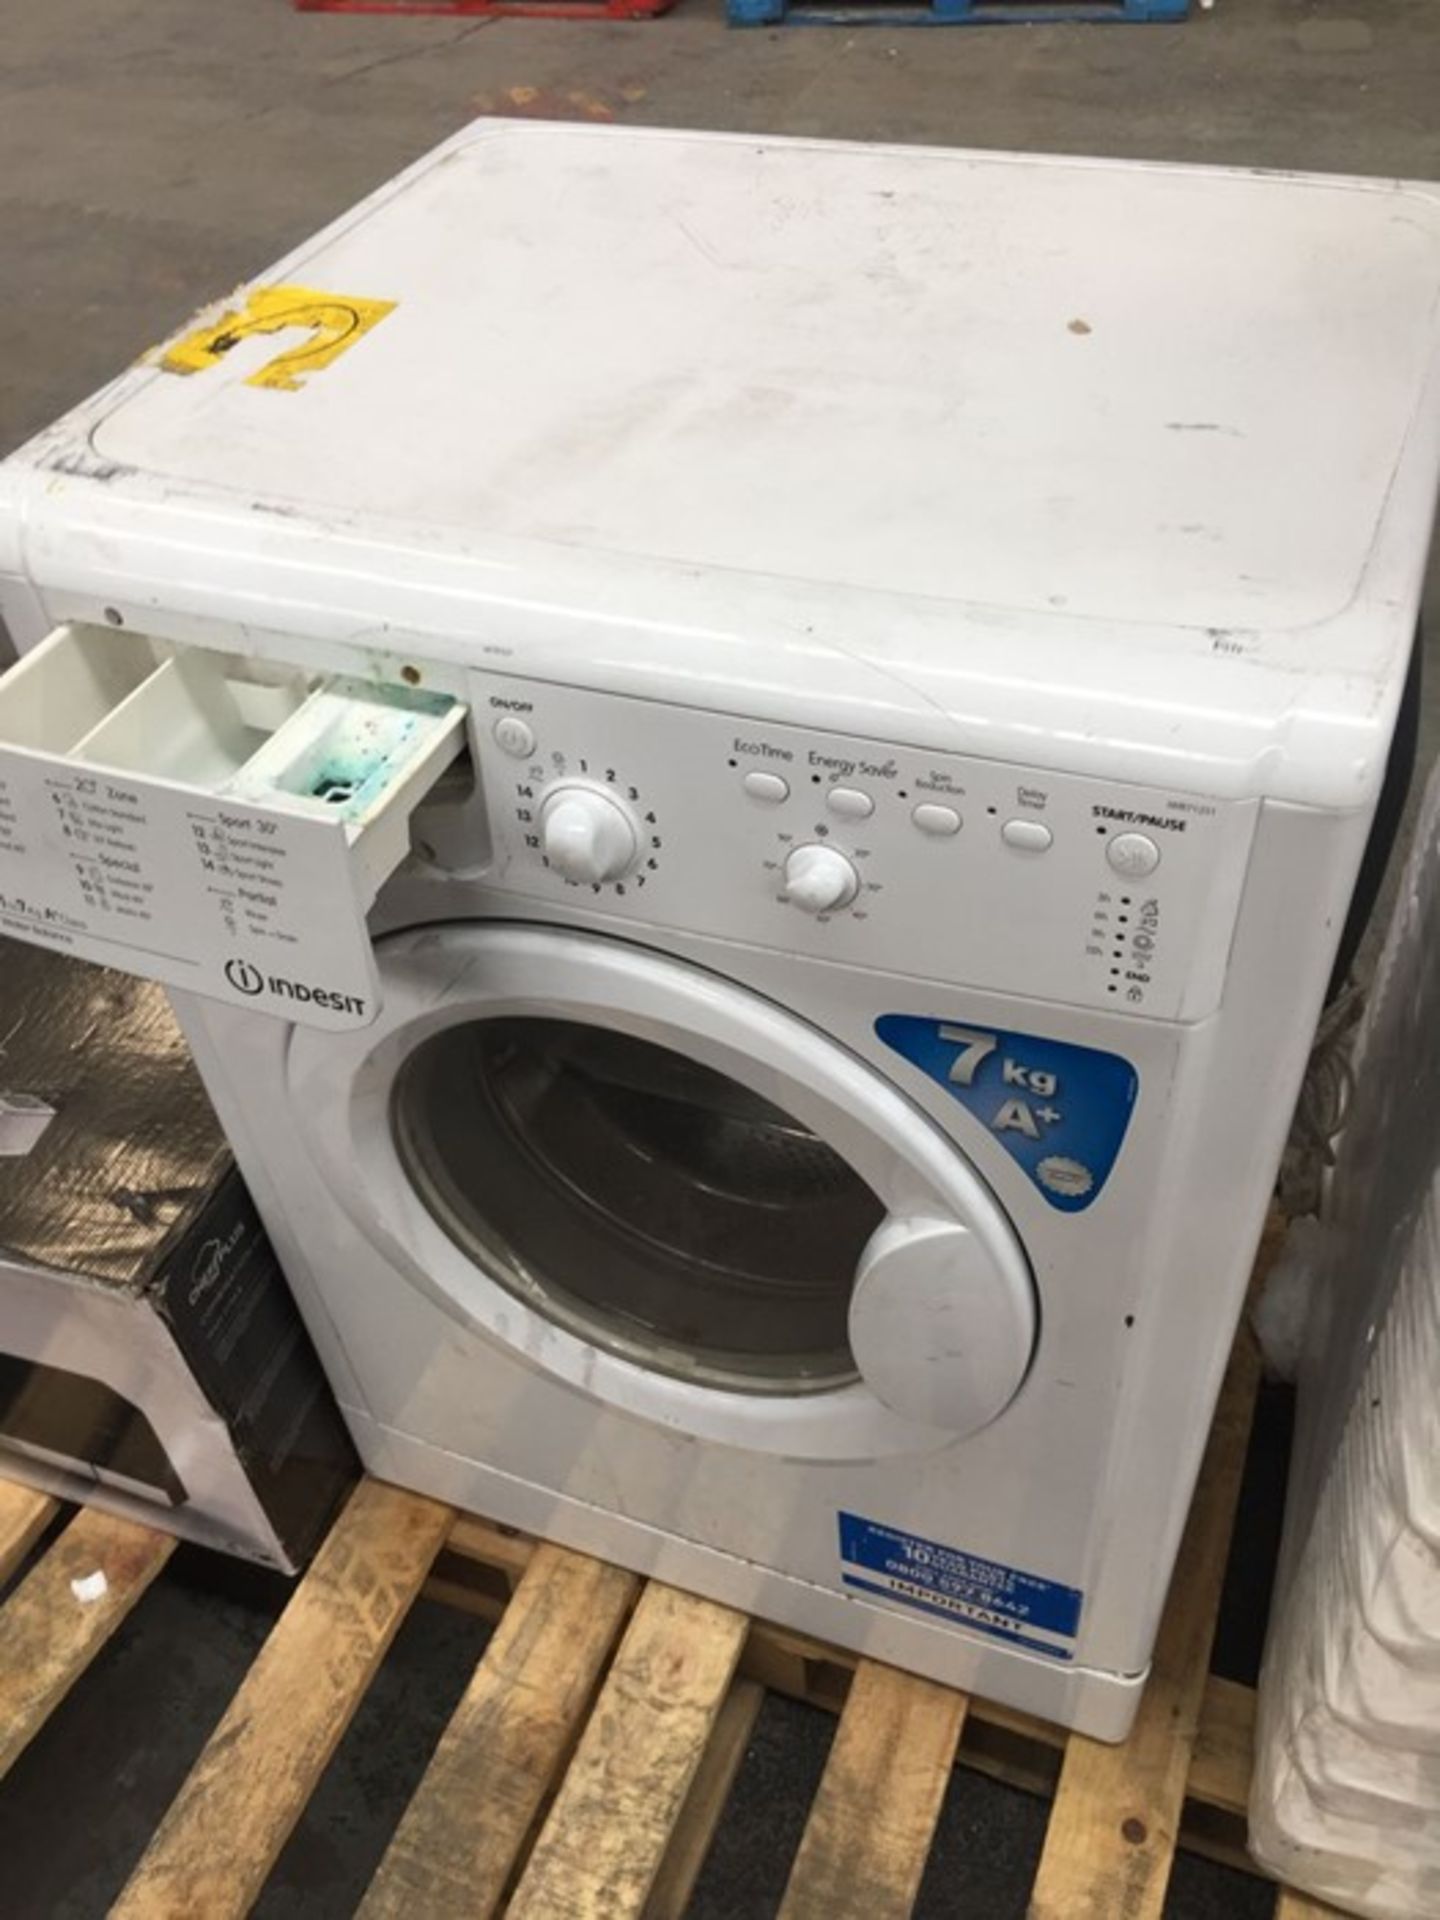 1 INDESIT IWB71251 WASHING MACHINE / RRP £230.00 / CONDITION REPORT: HEAVILY USED, COSMETIC DAMAGE